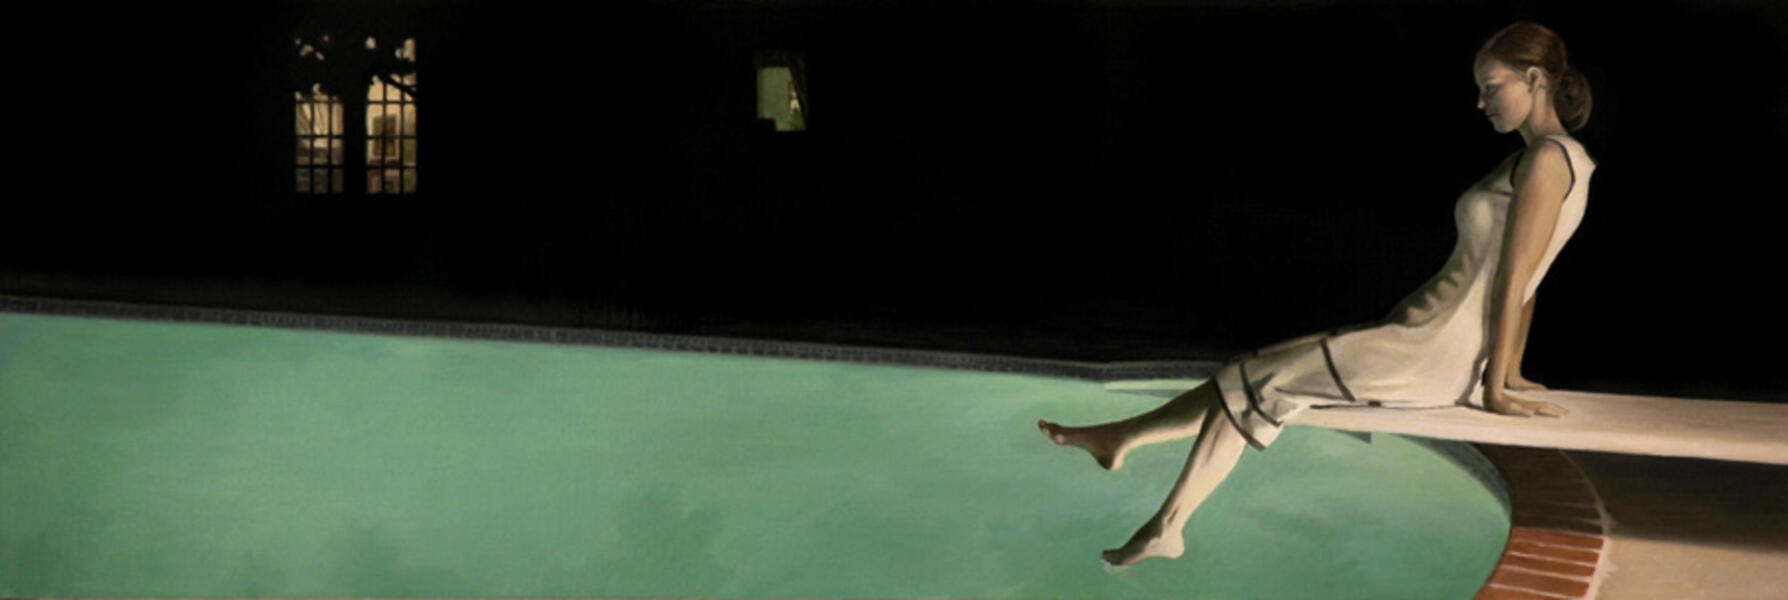 Pool - 16x36 inches - Oil on canvas - 2008